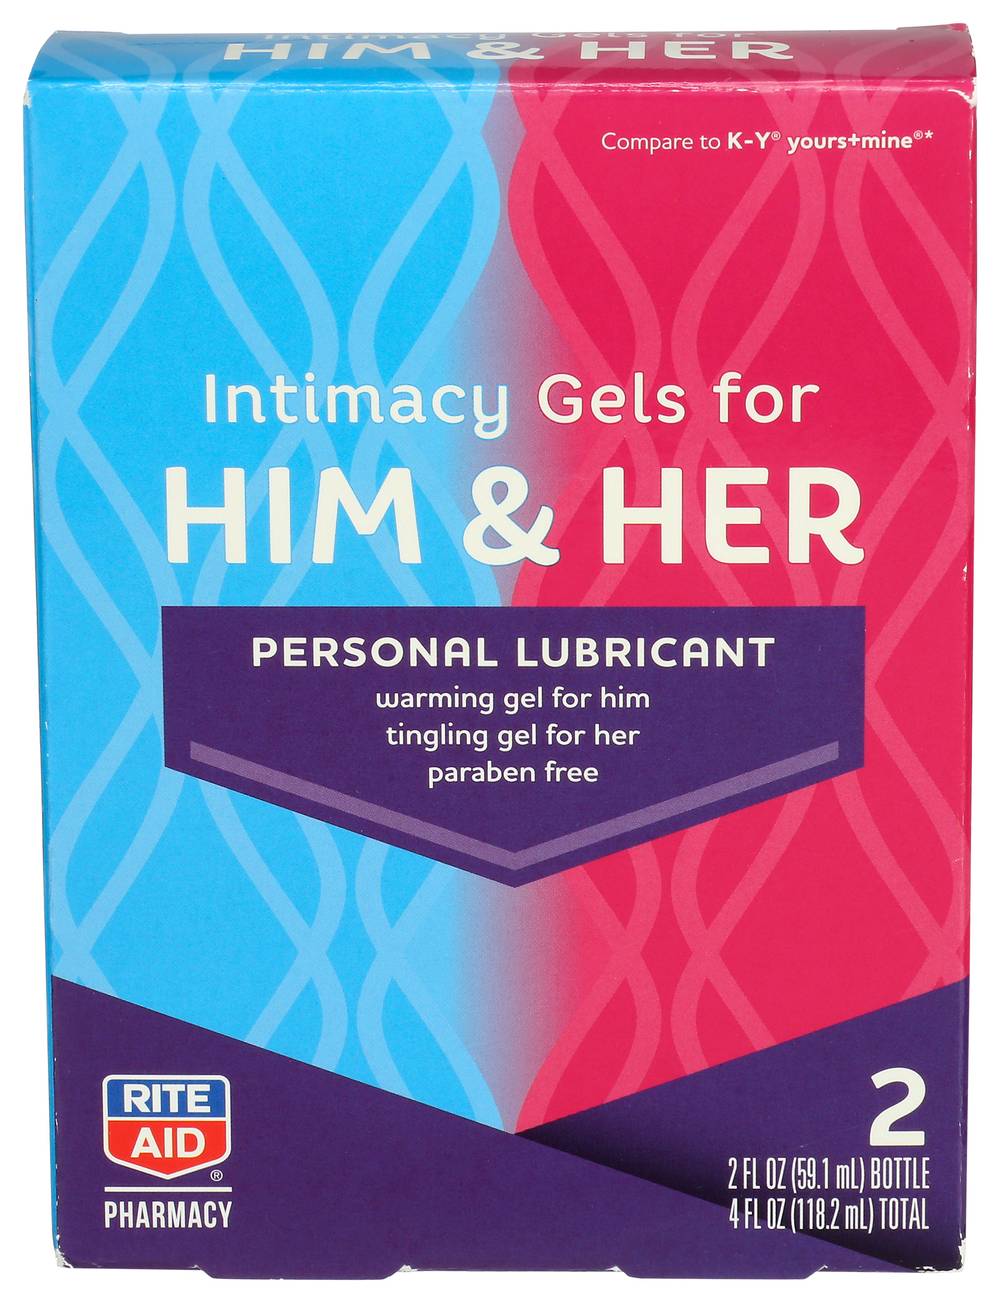 Rite Aid Intimacy Gel for Him & Her Personal Lubricant, 2 fl oz - 2 ct